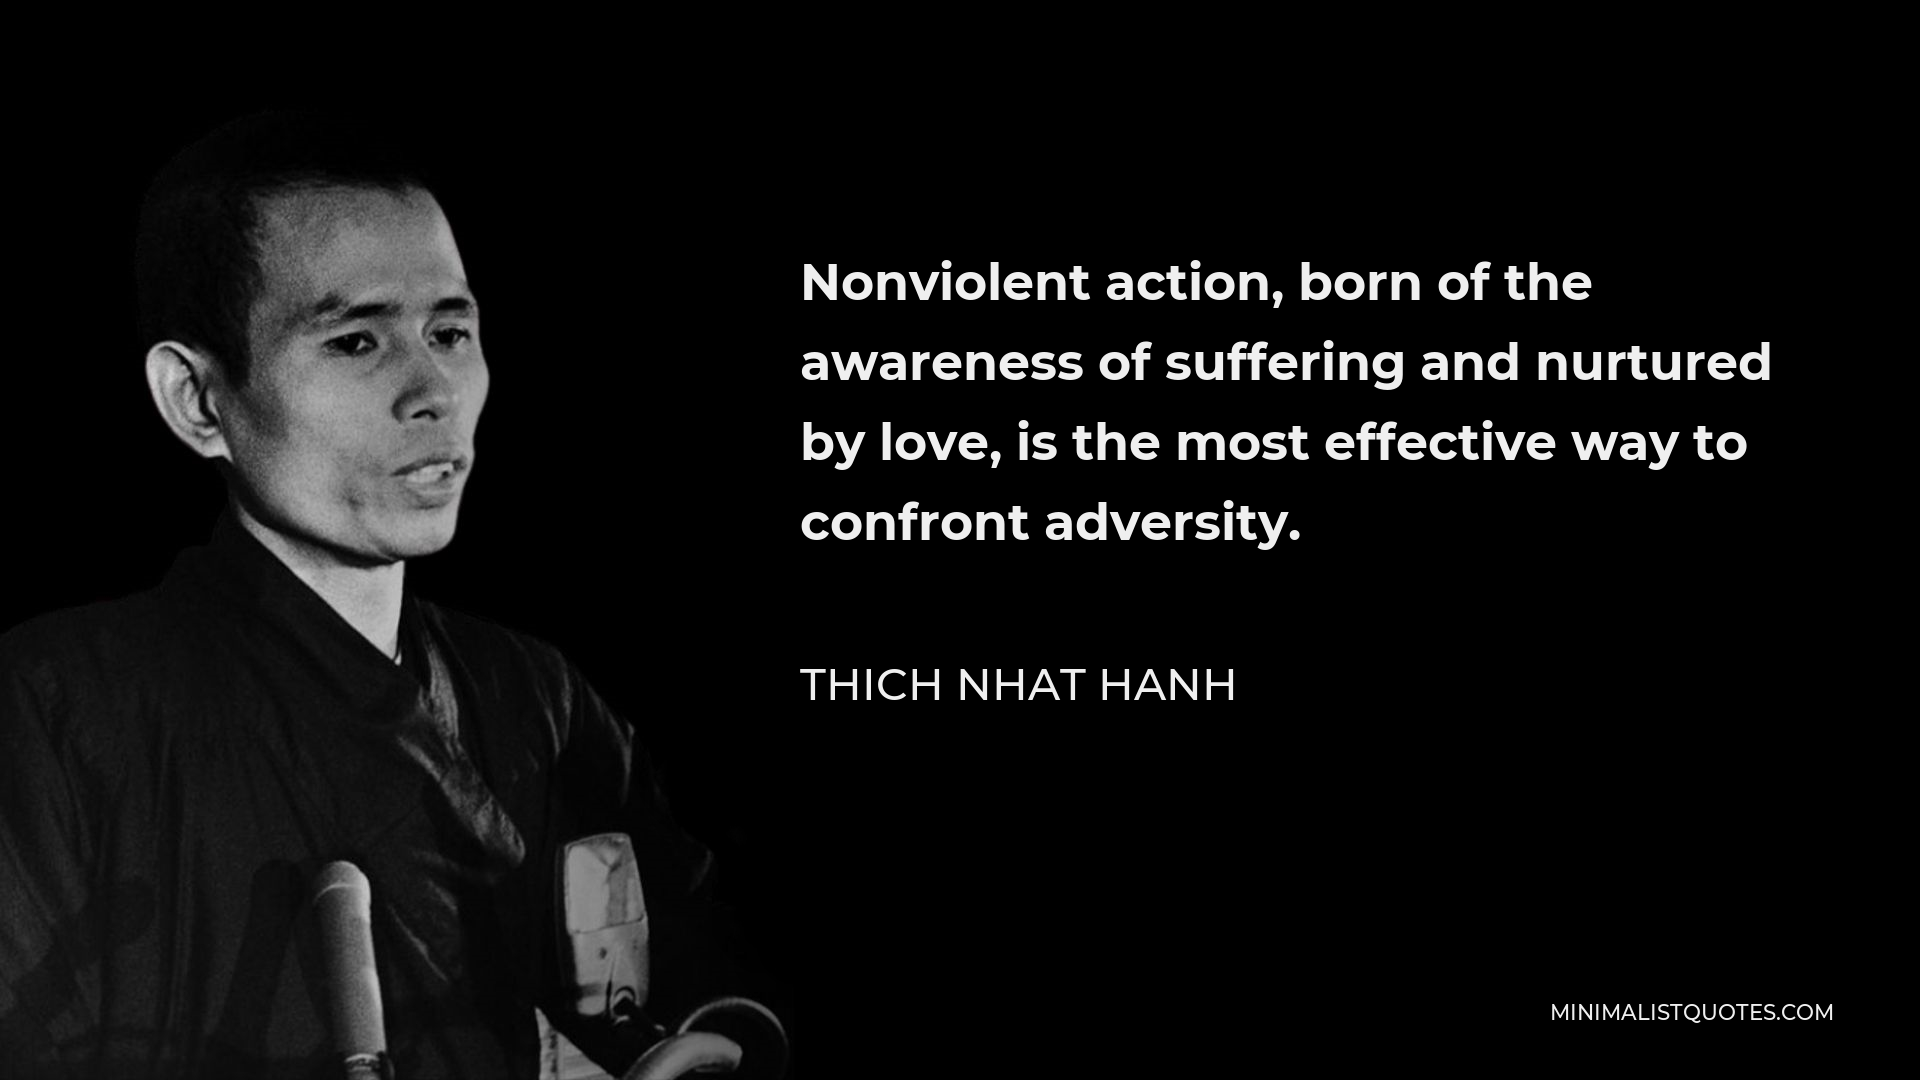 Thich Nhat Hanh Quote - Nonviolent action, born of the awareness of suffering and nurtured by love, is the most effective way to confront adversity.